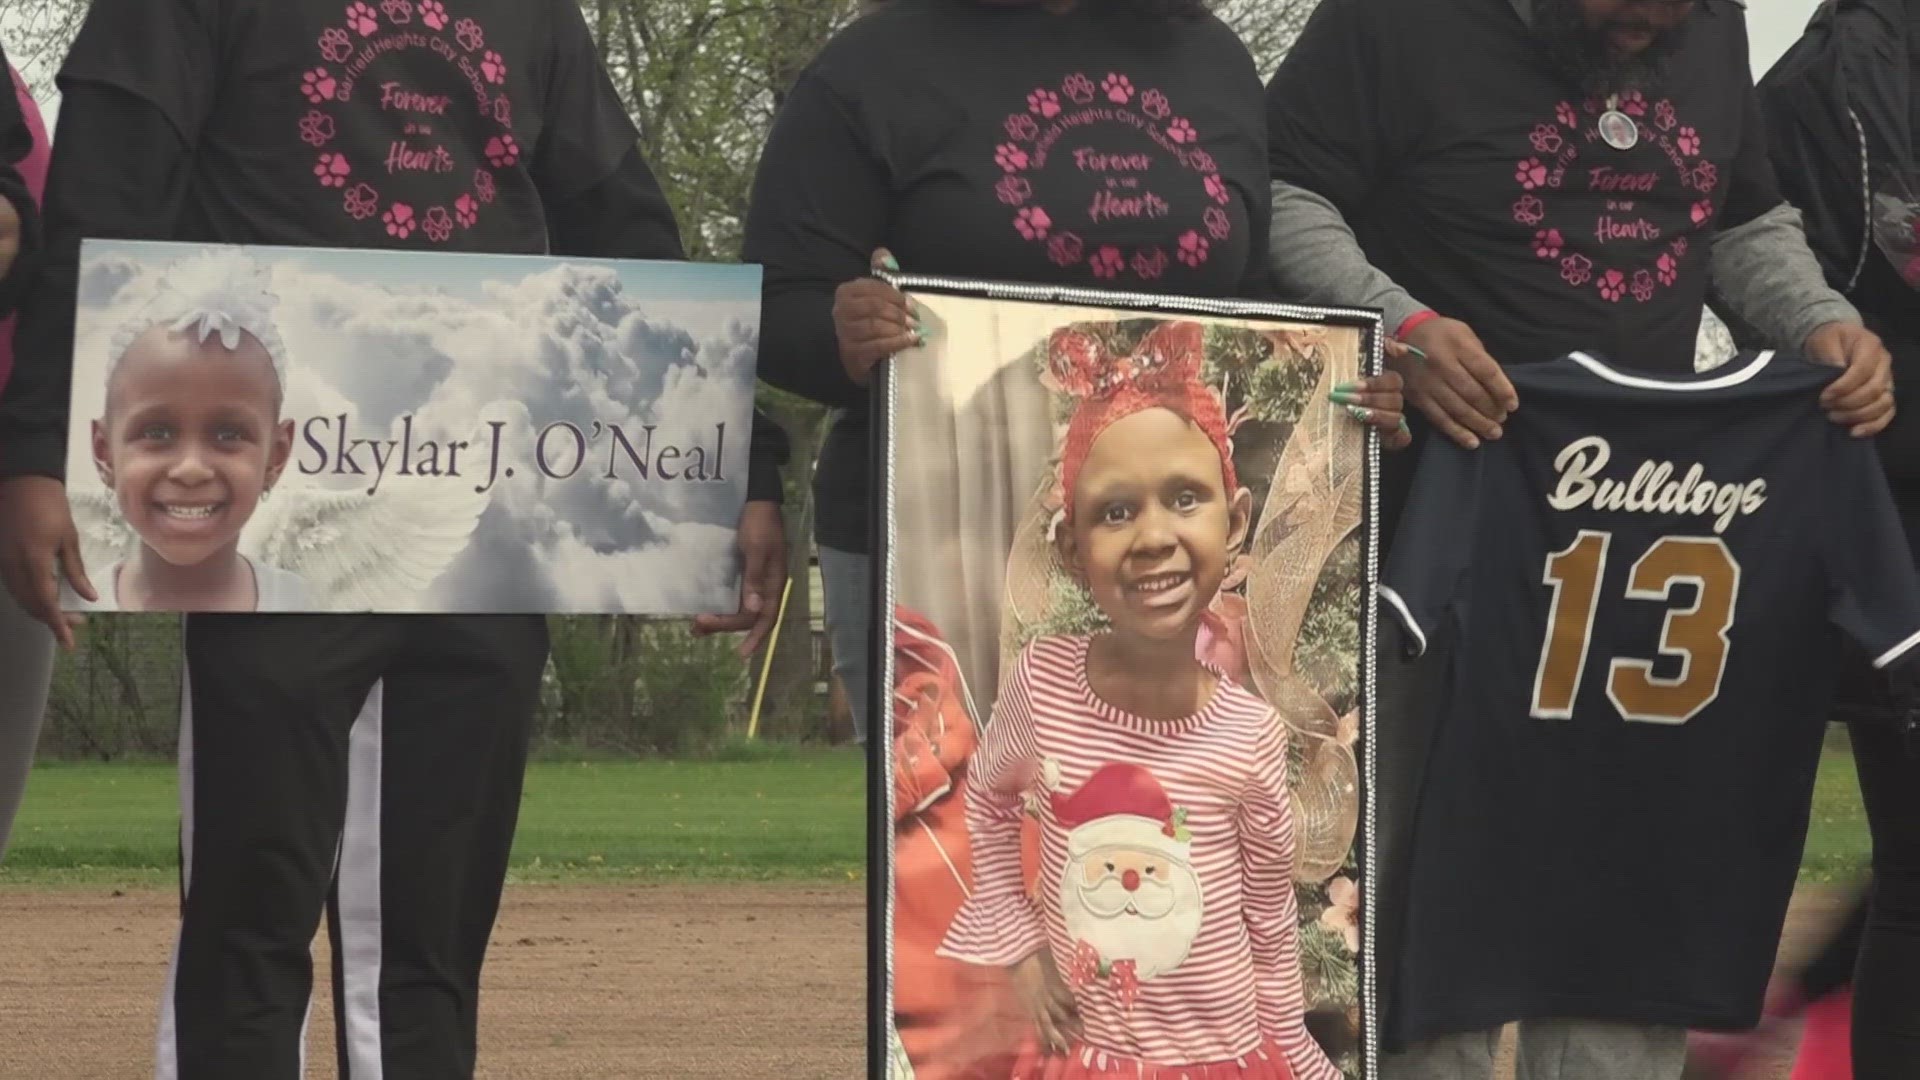 Skylar O'Neal was diagnosed with brain cancer at just 3 years old and passed away surrounded by family.